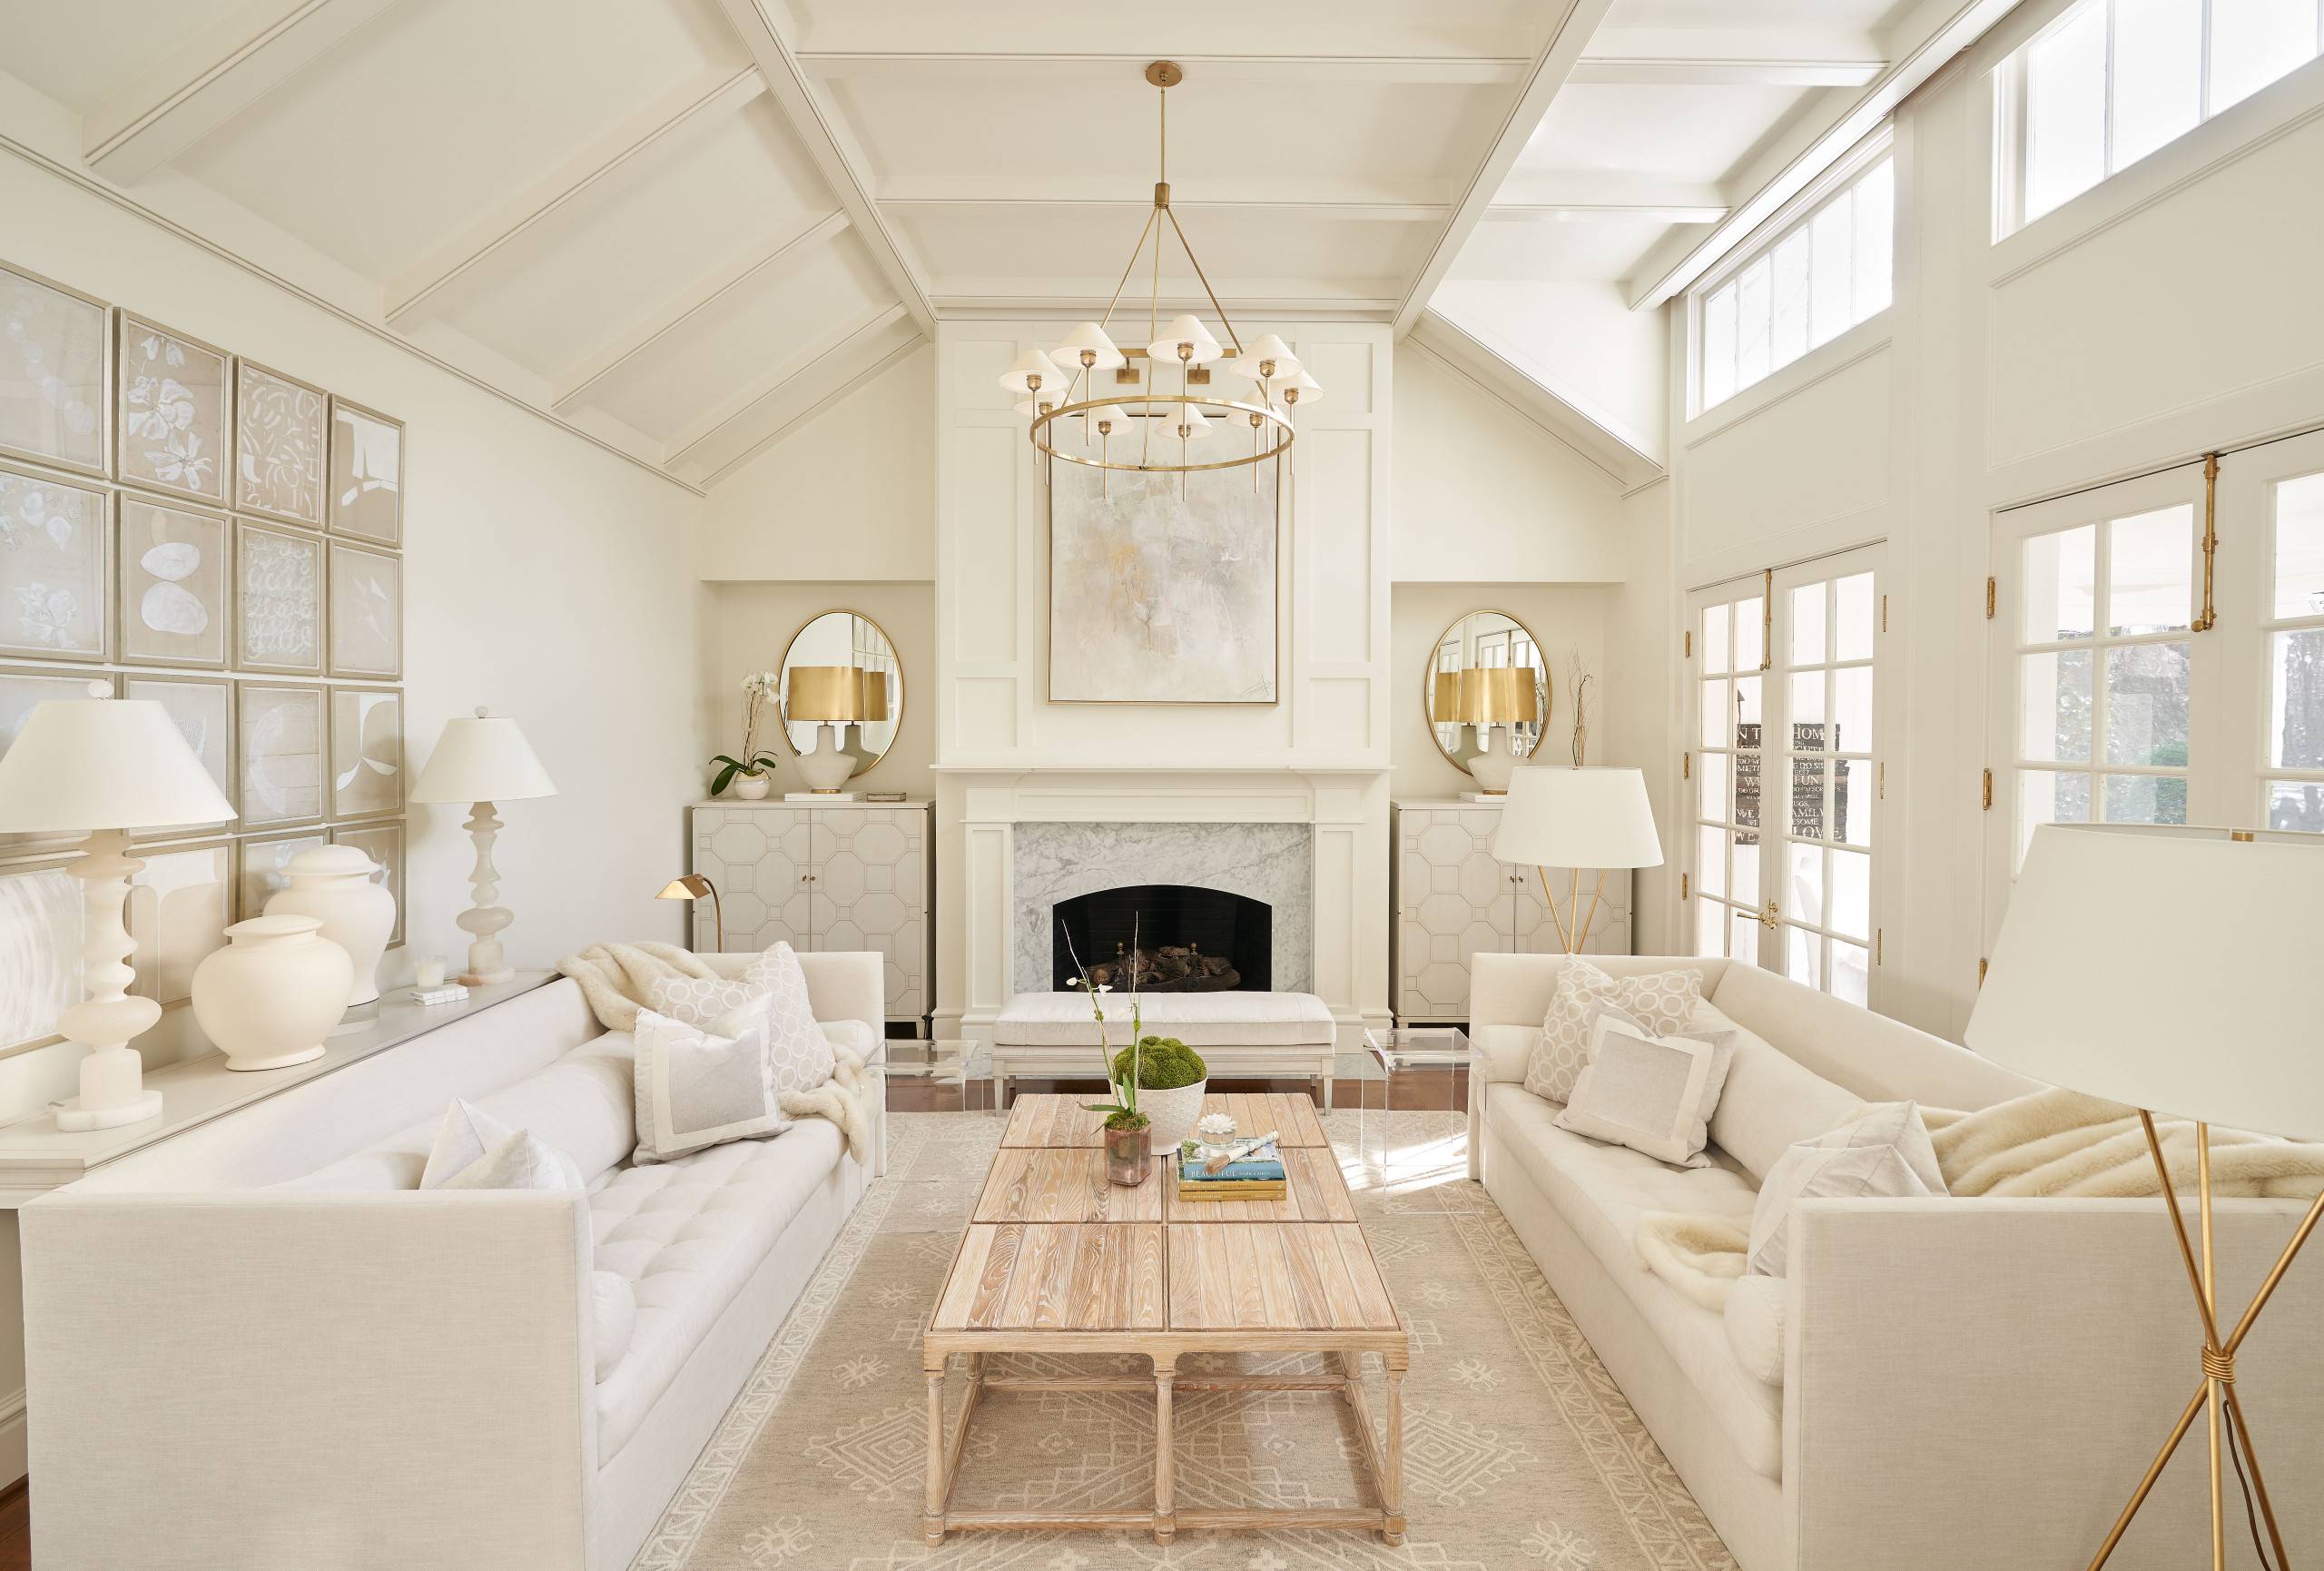 Sophisticated yet cozy living room (from Houzz)